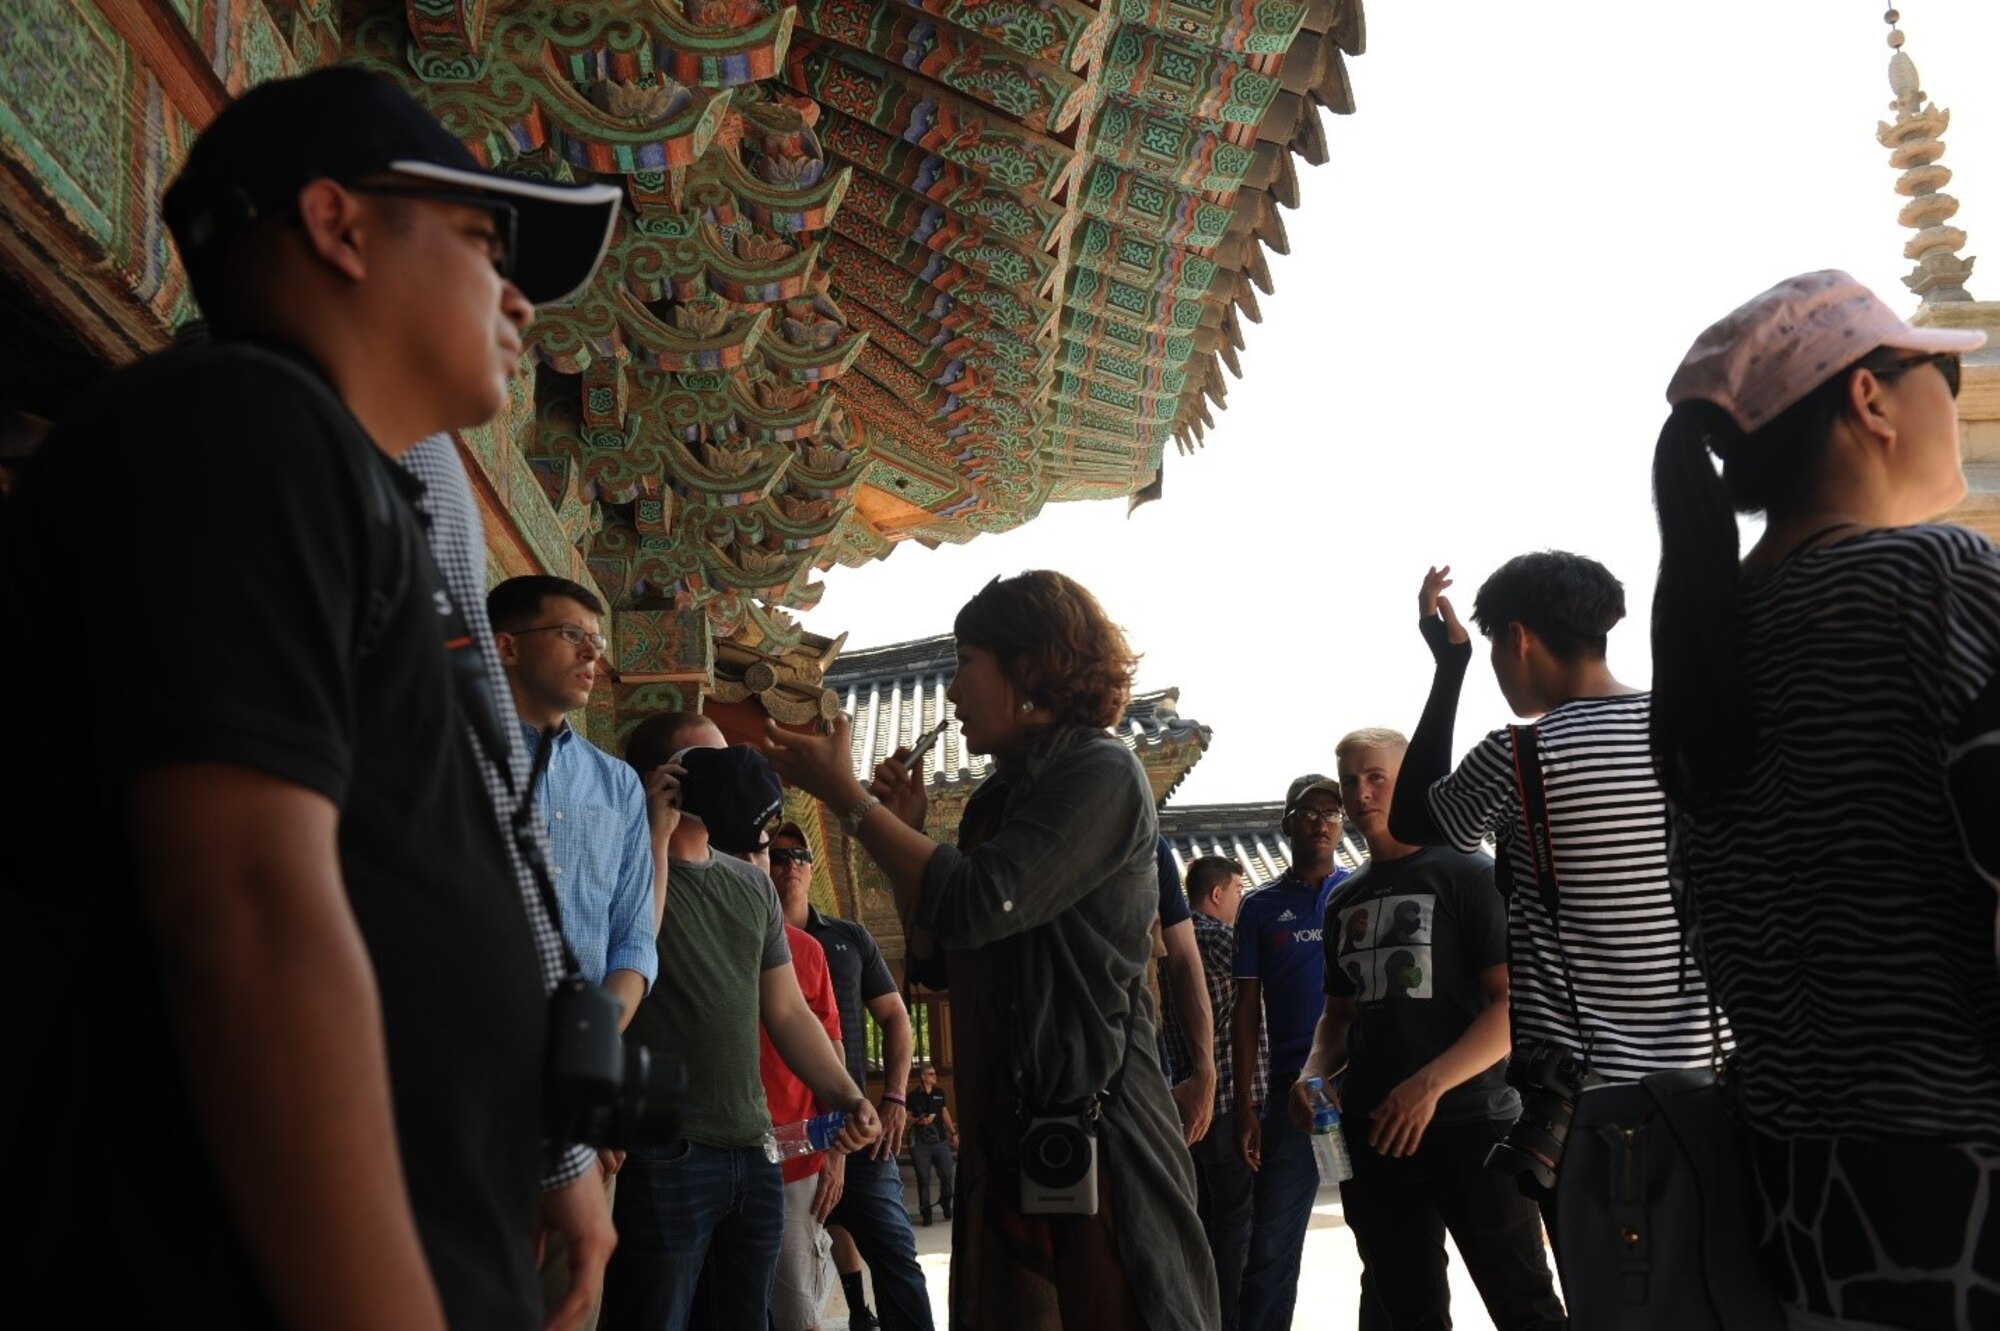 A Bulguksa Temple tour guide provides the history and significance of the temple and surrounding structures to United States Forces Korea members in Gyeongju, Republic of Korea, July 19, 2017. The temple was constructed under the Silla kingdom in 528 and is known for its stone pagodas. Nearly 100 USFK members were invited by the Ministry of Patriots and Veterans Affairs to tour this location and other historic sites across the ROK as part of an initiative to give U.S. personnel a better understanding of Korean culture and patriotism. (U.S. Air Force photo by 1st Lt. Lauren Linscott/Released)